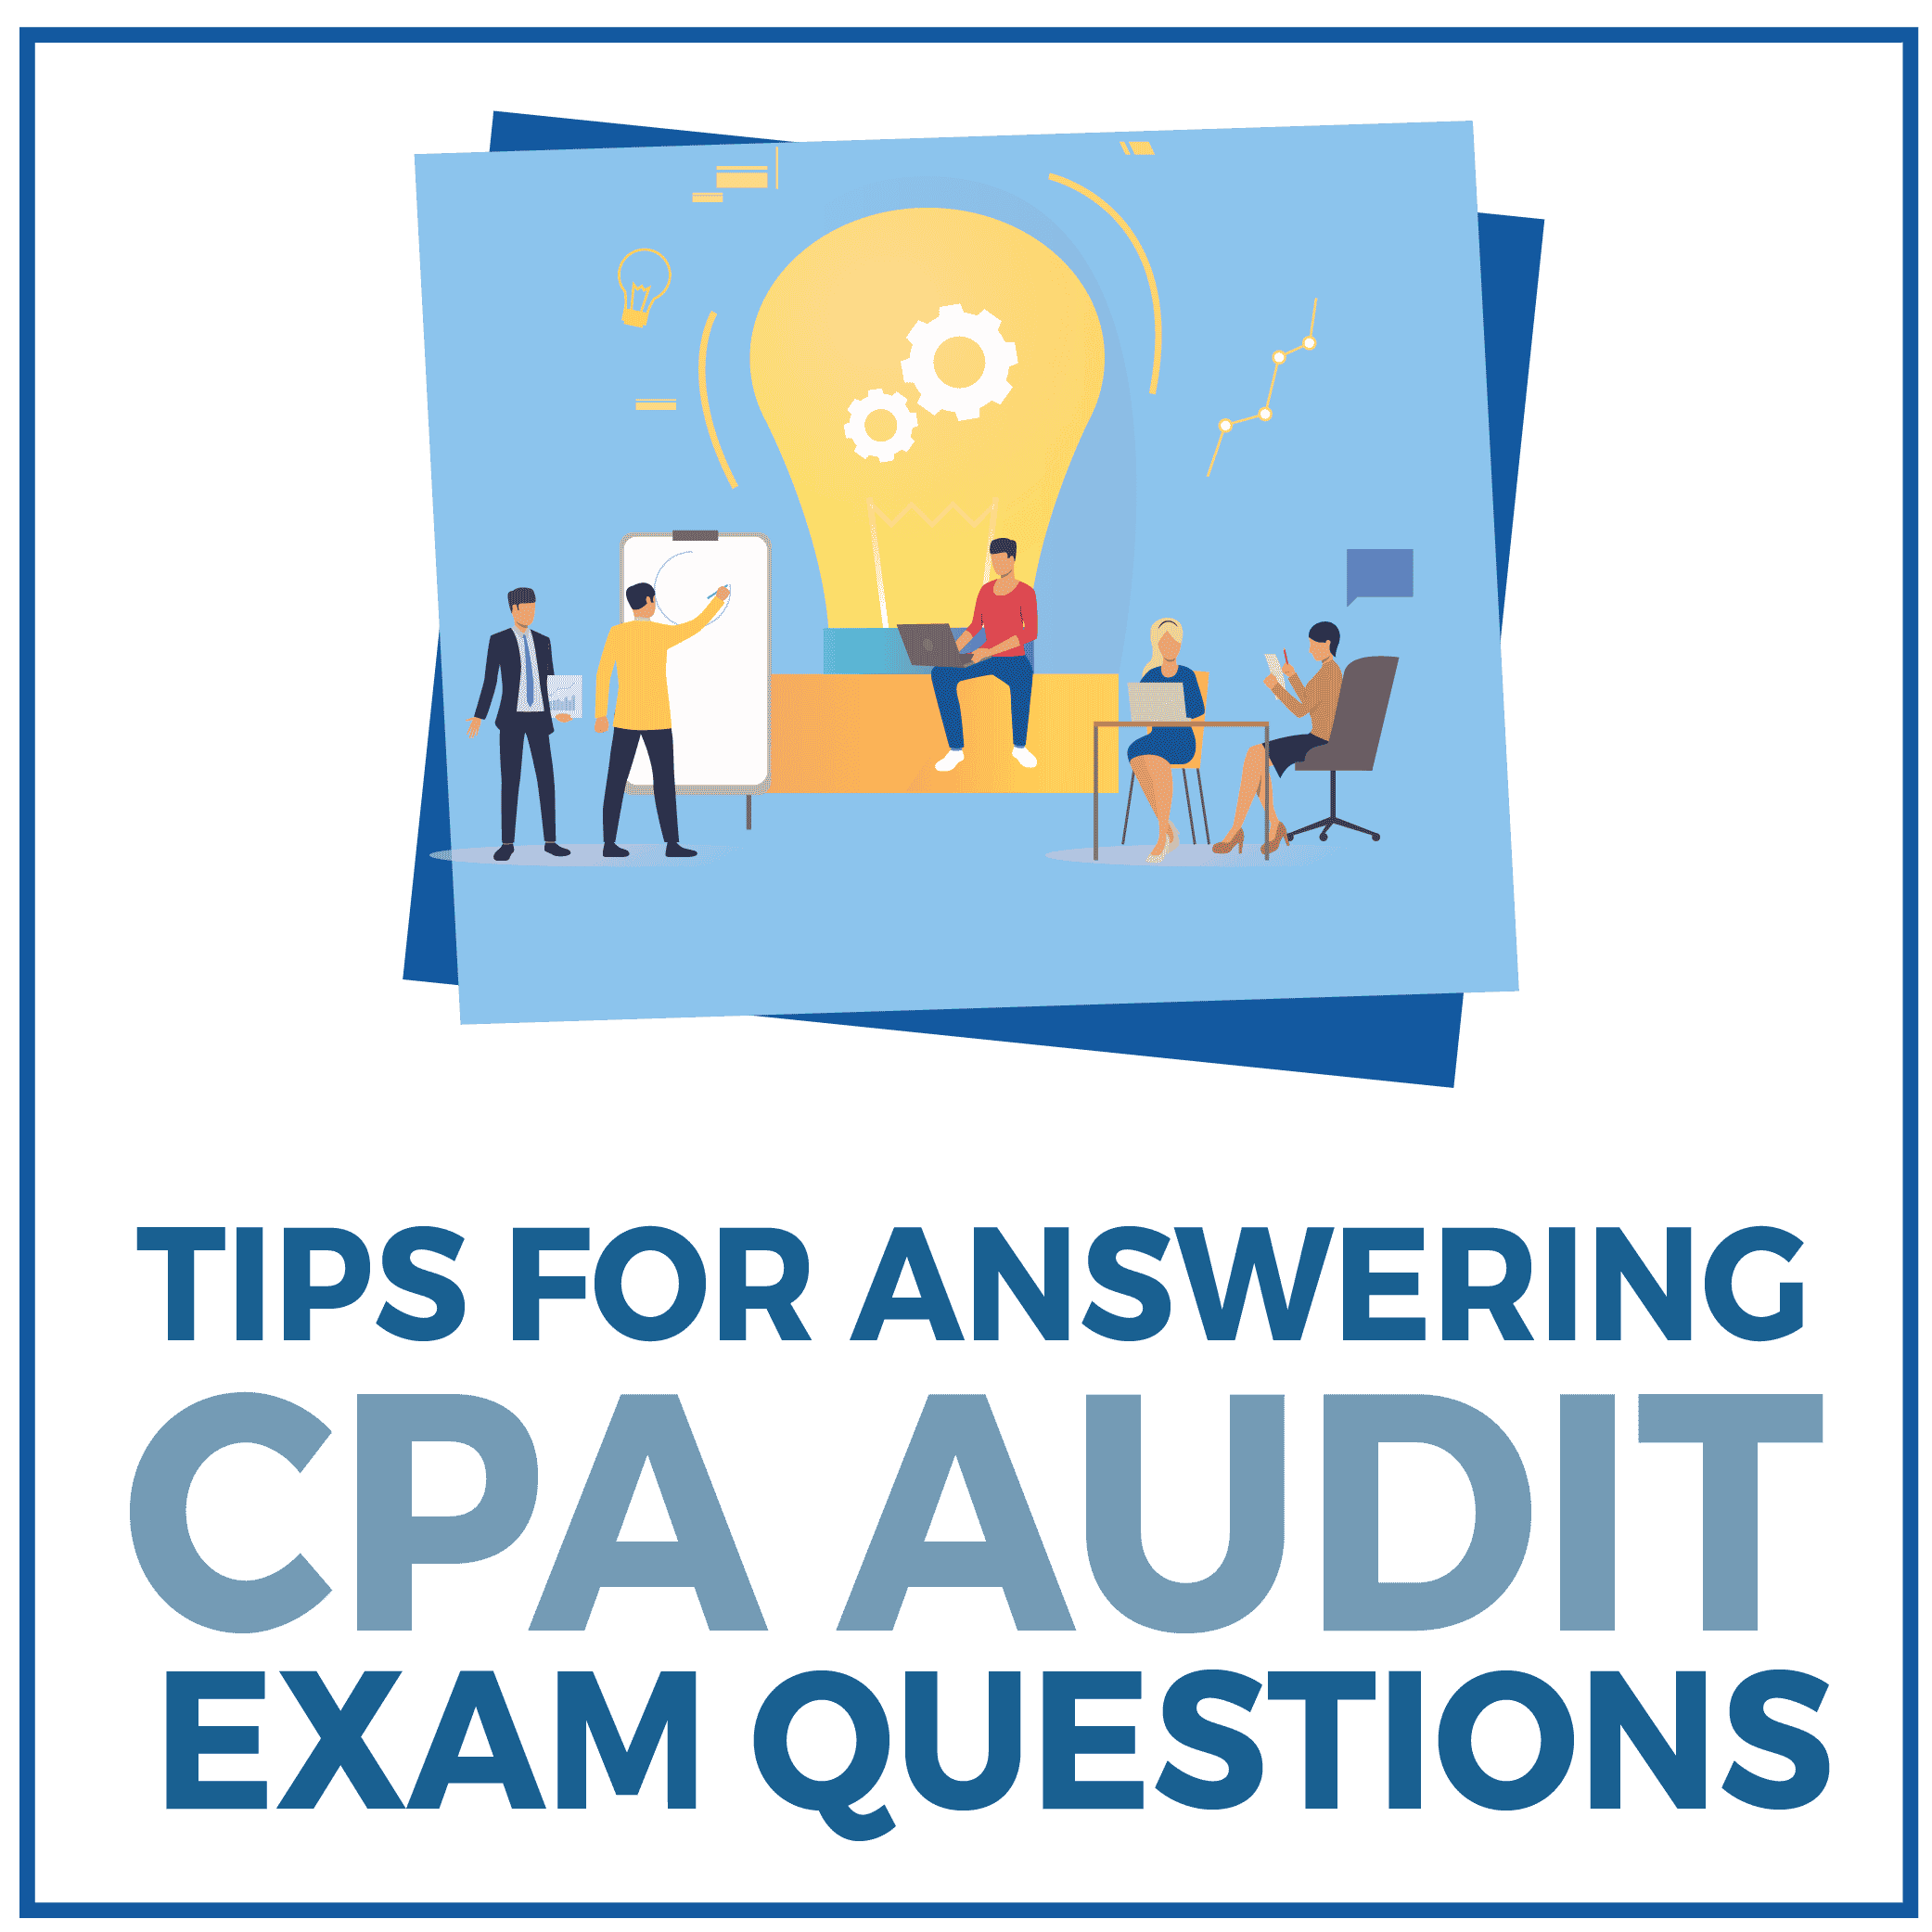 Tips for Answering CPA Audit Exam Questions